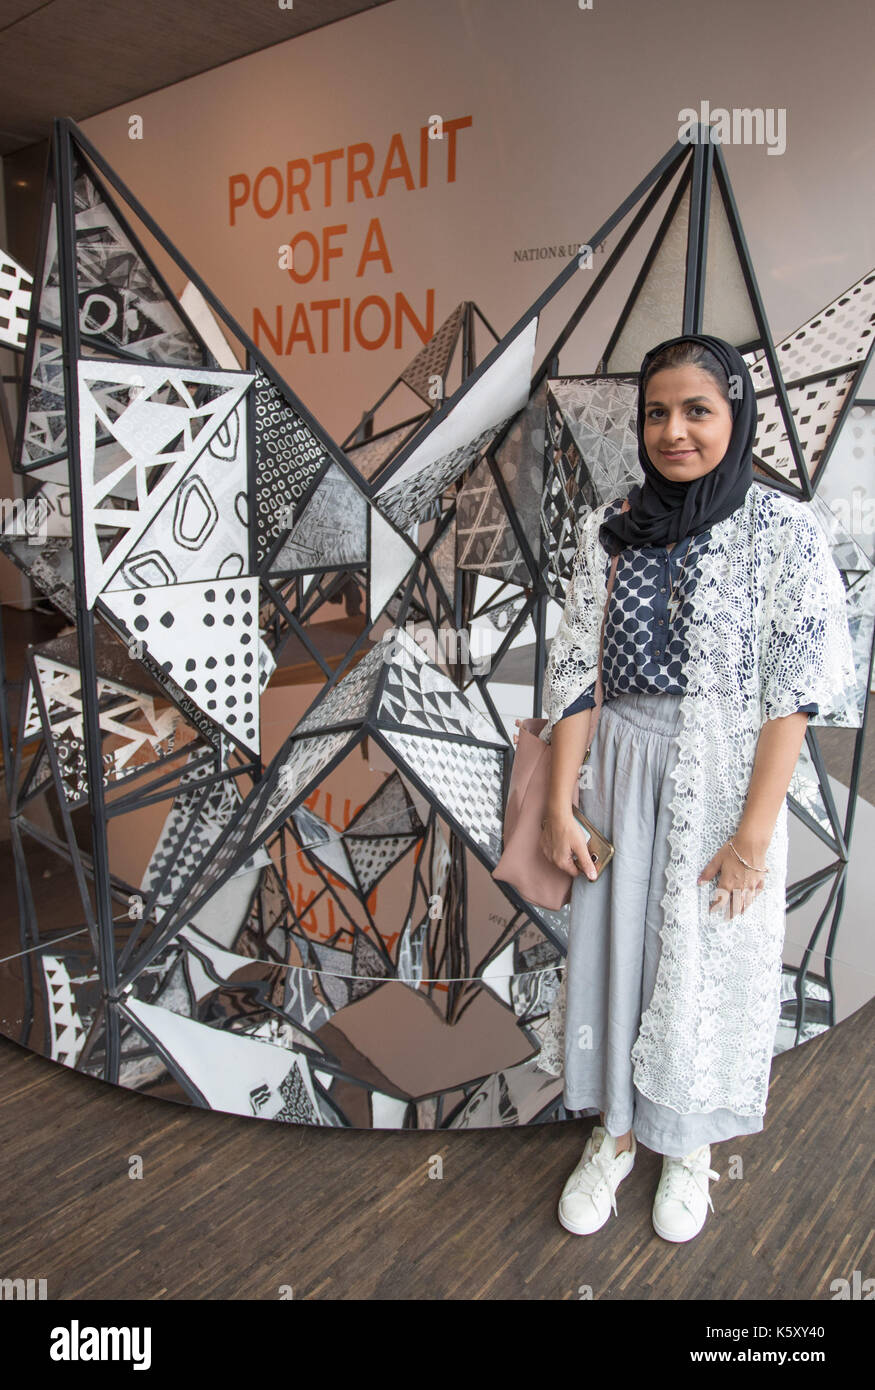 Berlin, Germany. 11th Sep, 2017. The artist Eman Alhashemi stands next toher installation 'Around' at the exhibition 'Portrait of a Nation' at the 'me Collectors Room' in Berlin, Germany, 11 September 2017. The exhibition is taking place as part of the Berlin Art Week, which will be held from the 13th to the 17th of September 2017. (ATTENTION EDITORS: EDITORIAL USE ONLY IN CONNECTION WITH CURRENT REPORTING/MANDATORY CREDIT: 'Jörg Carstensen/dpa') Photo: Jörg Carstensen/dpa/Alamy Live News Stock Photo